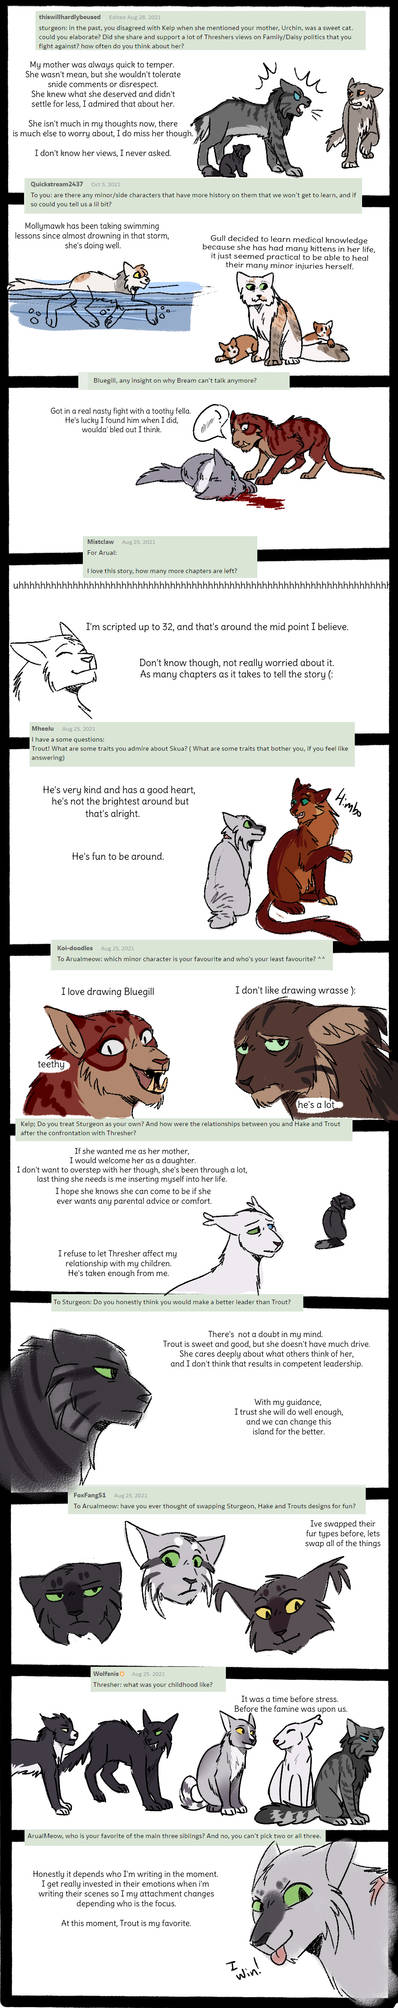 WLB qna- part 1 by ArualMeow on DeviantArt